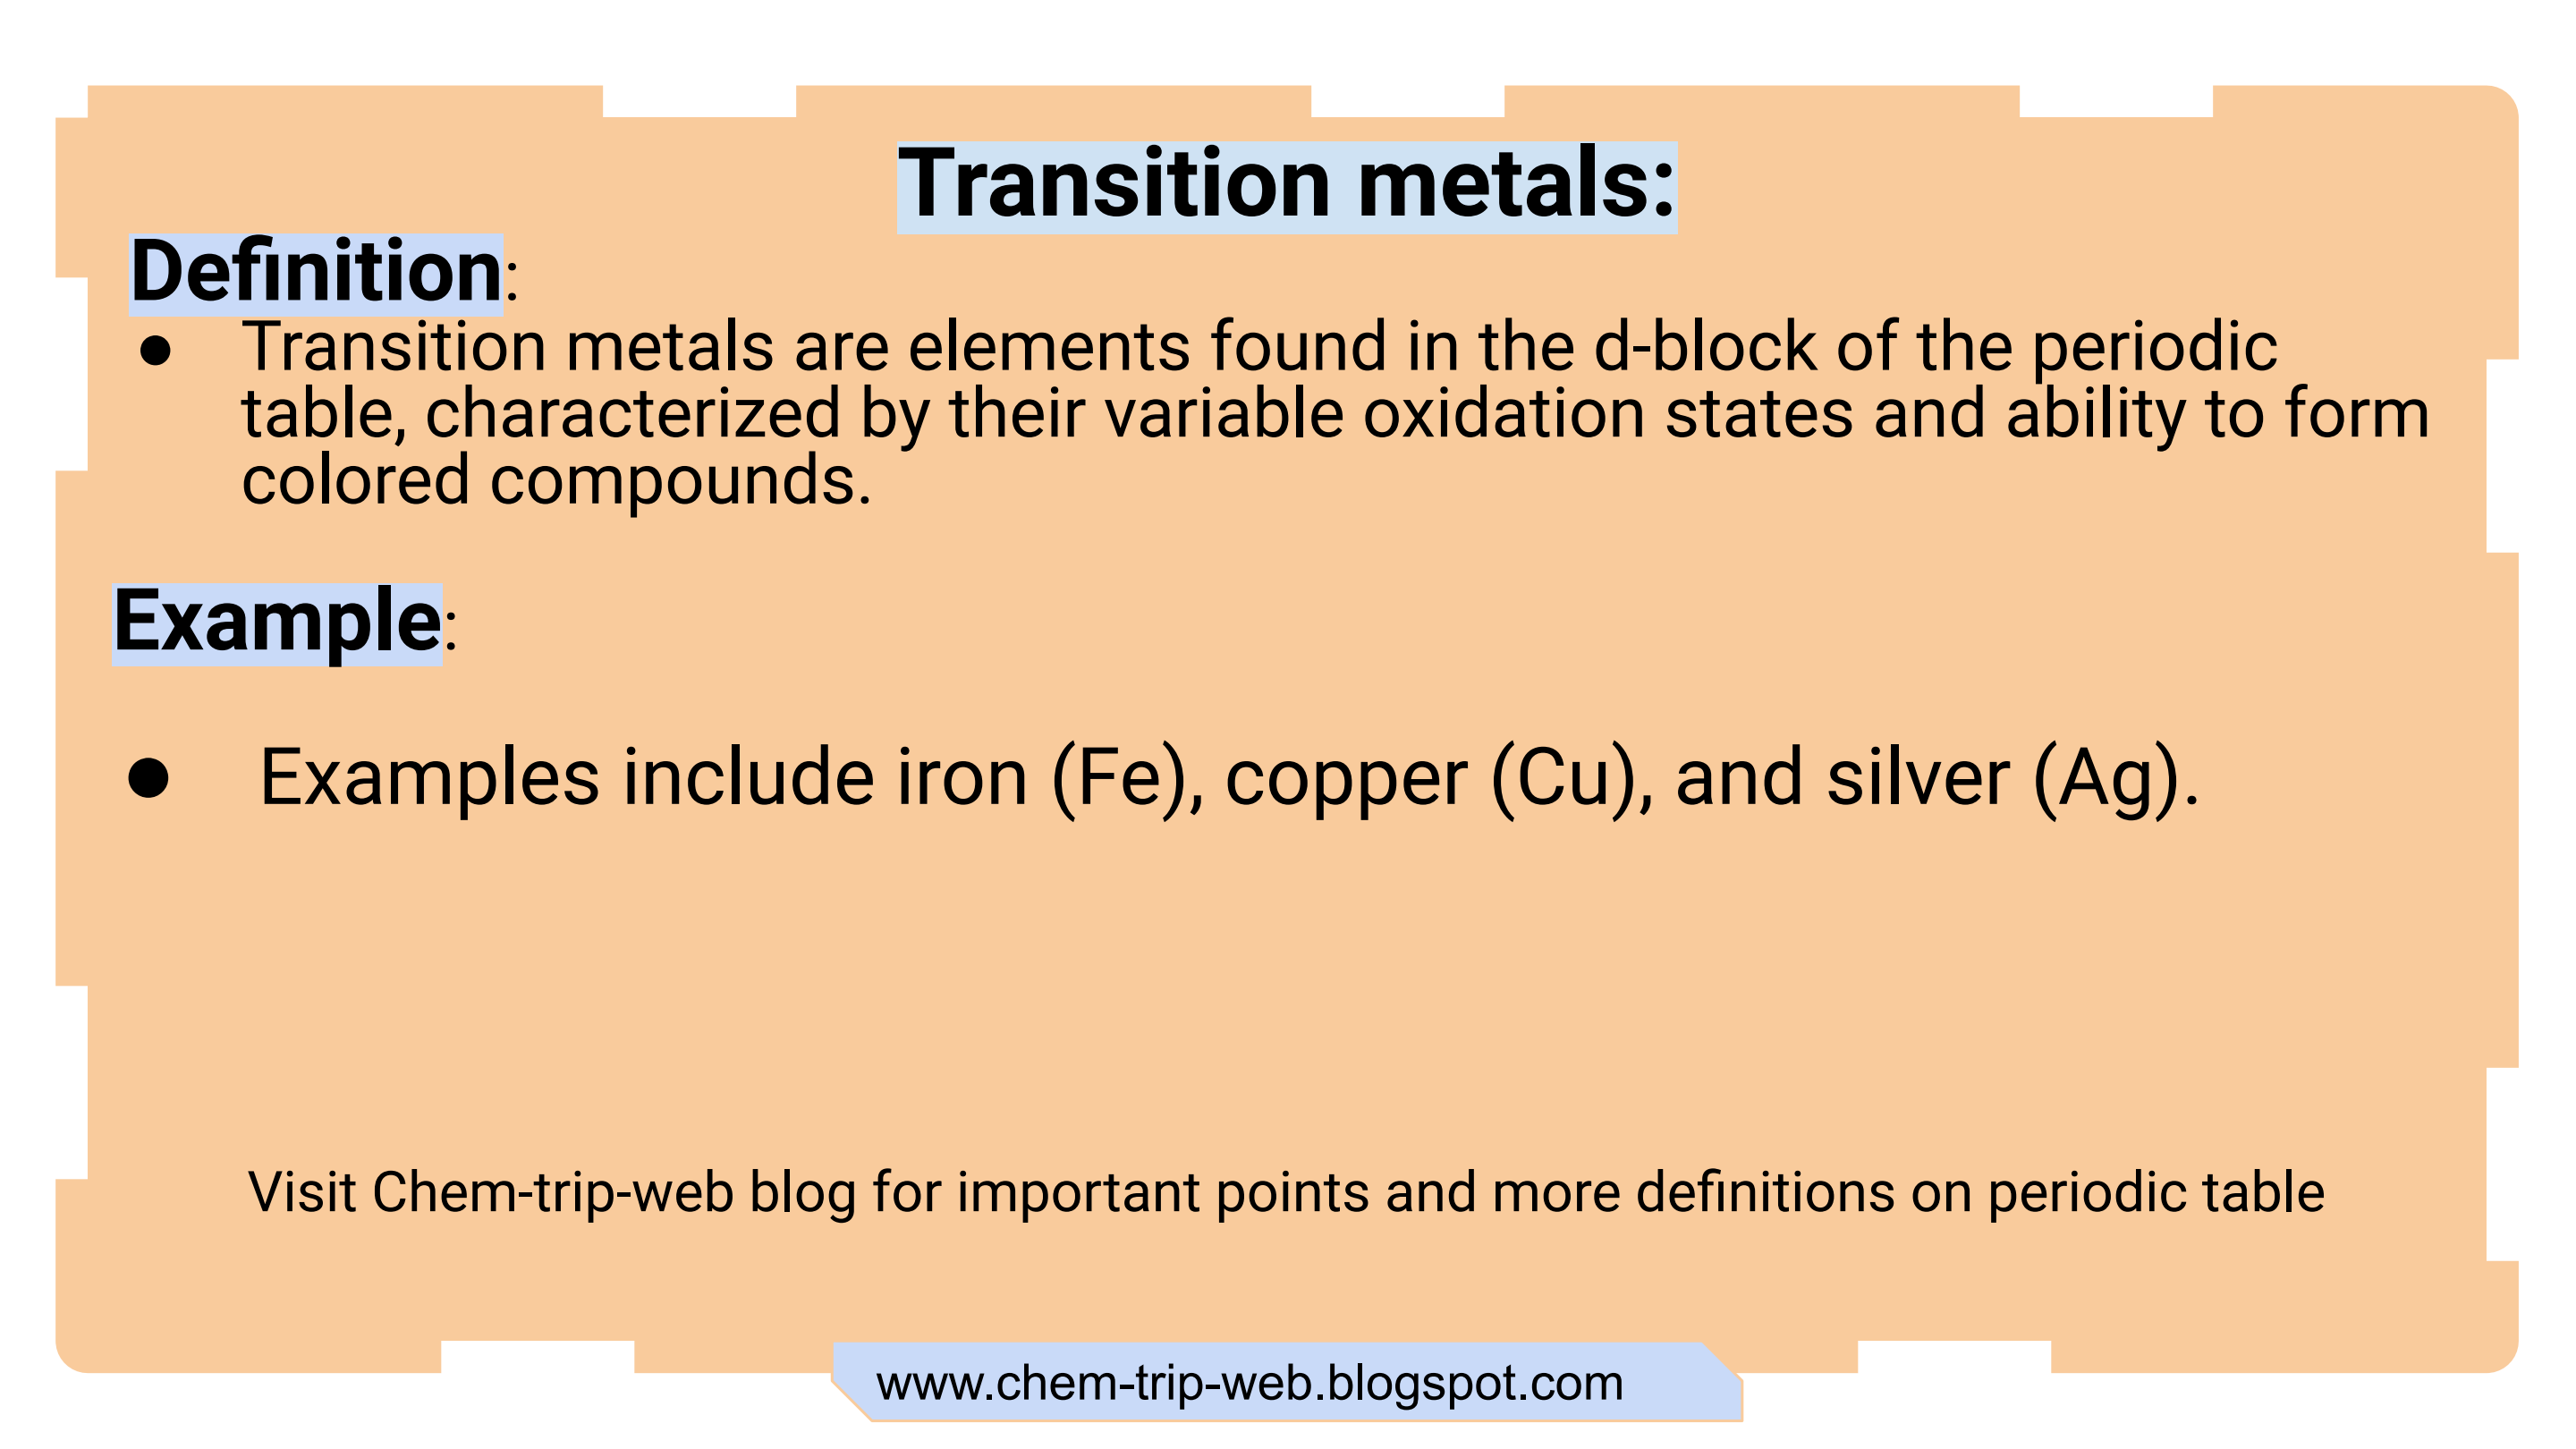 Transition metals are elements found in the d-block of the periodic table, characterized by their variable oxidation states and ability to form colored compounds.Examples include iron (Fe), copper (Cu), and silver (Ag). chem-trip-web